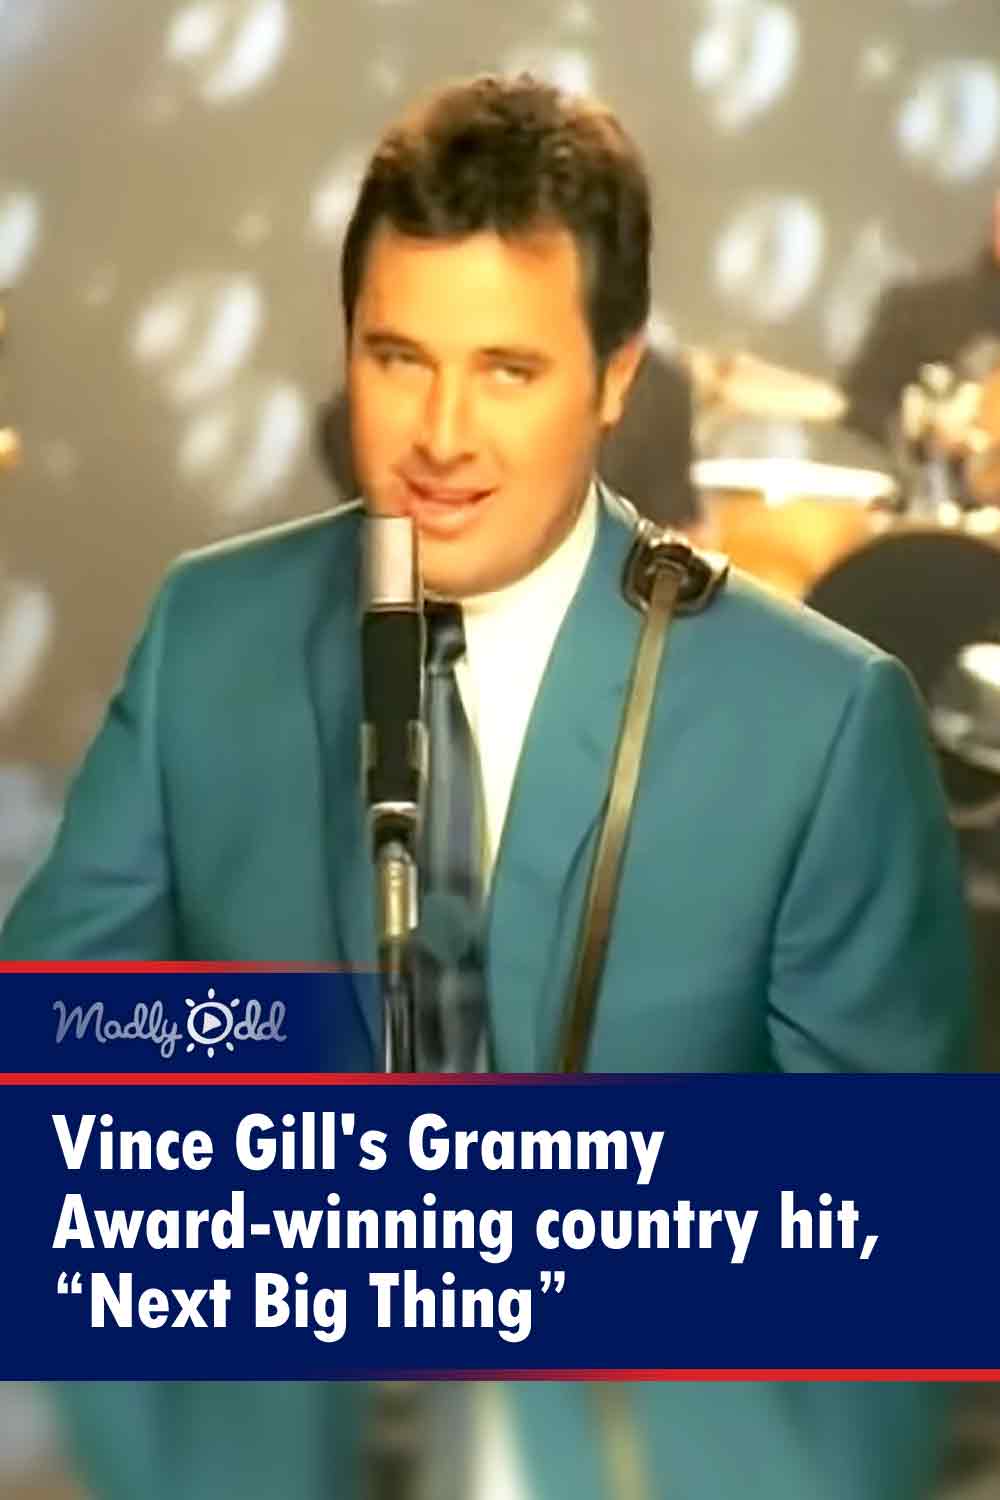 Vince Gill\'s Grammy Award-winning country hit, “Next Big Thing”